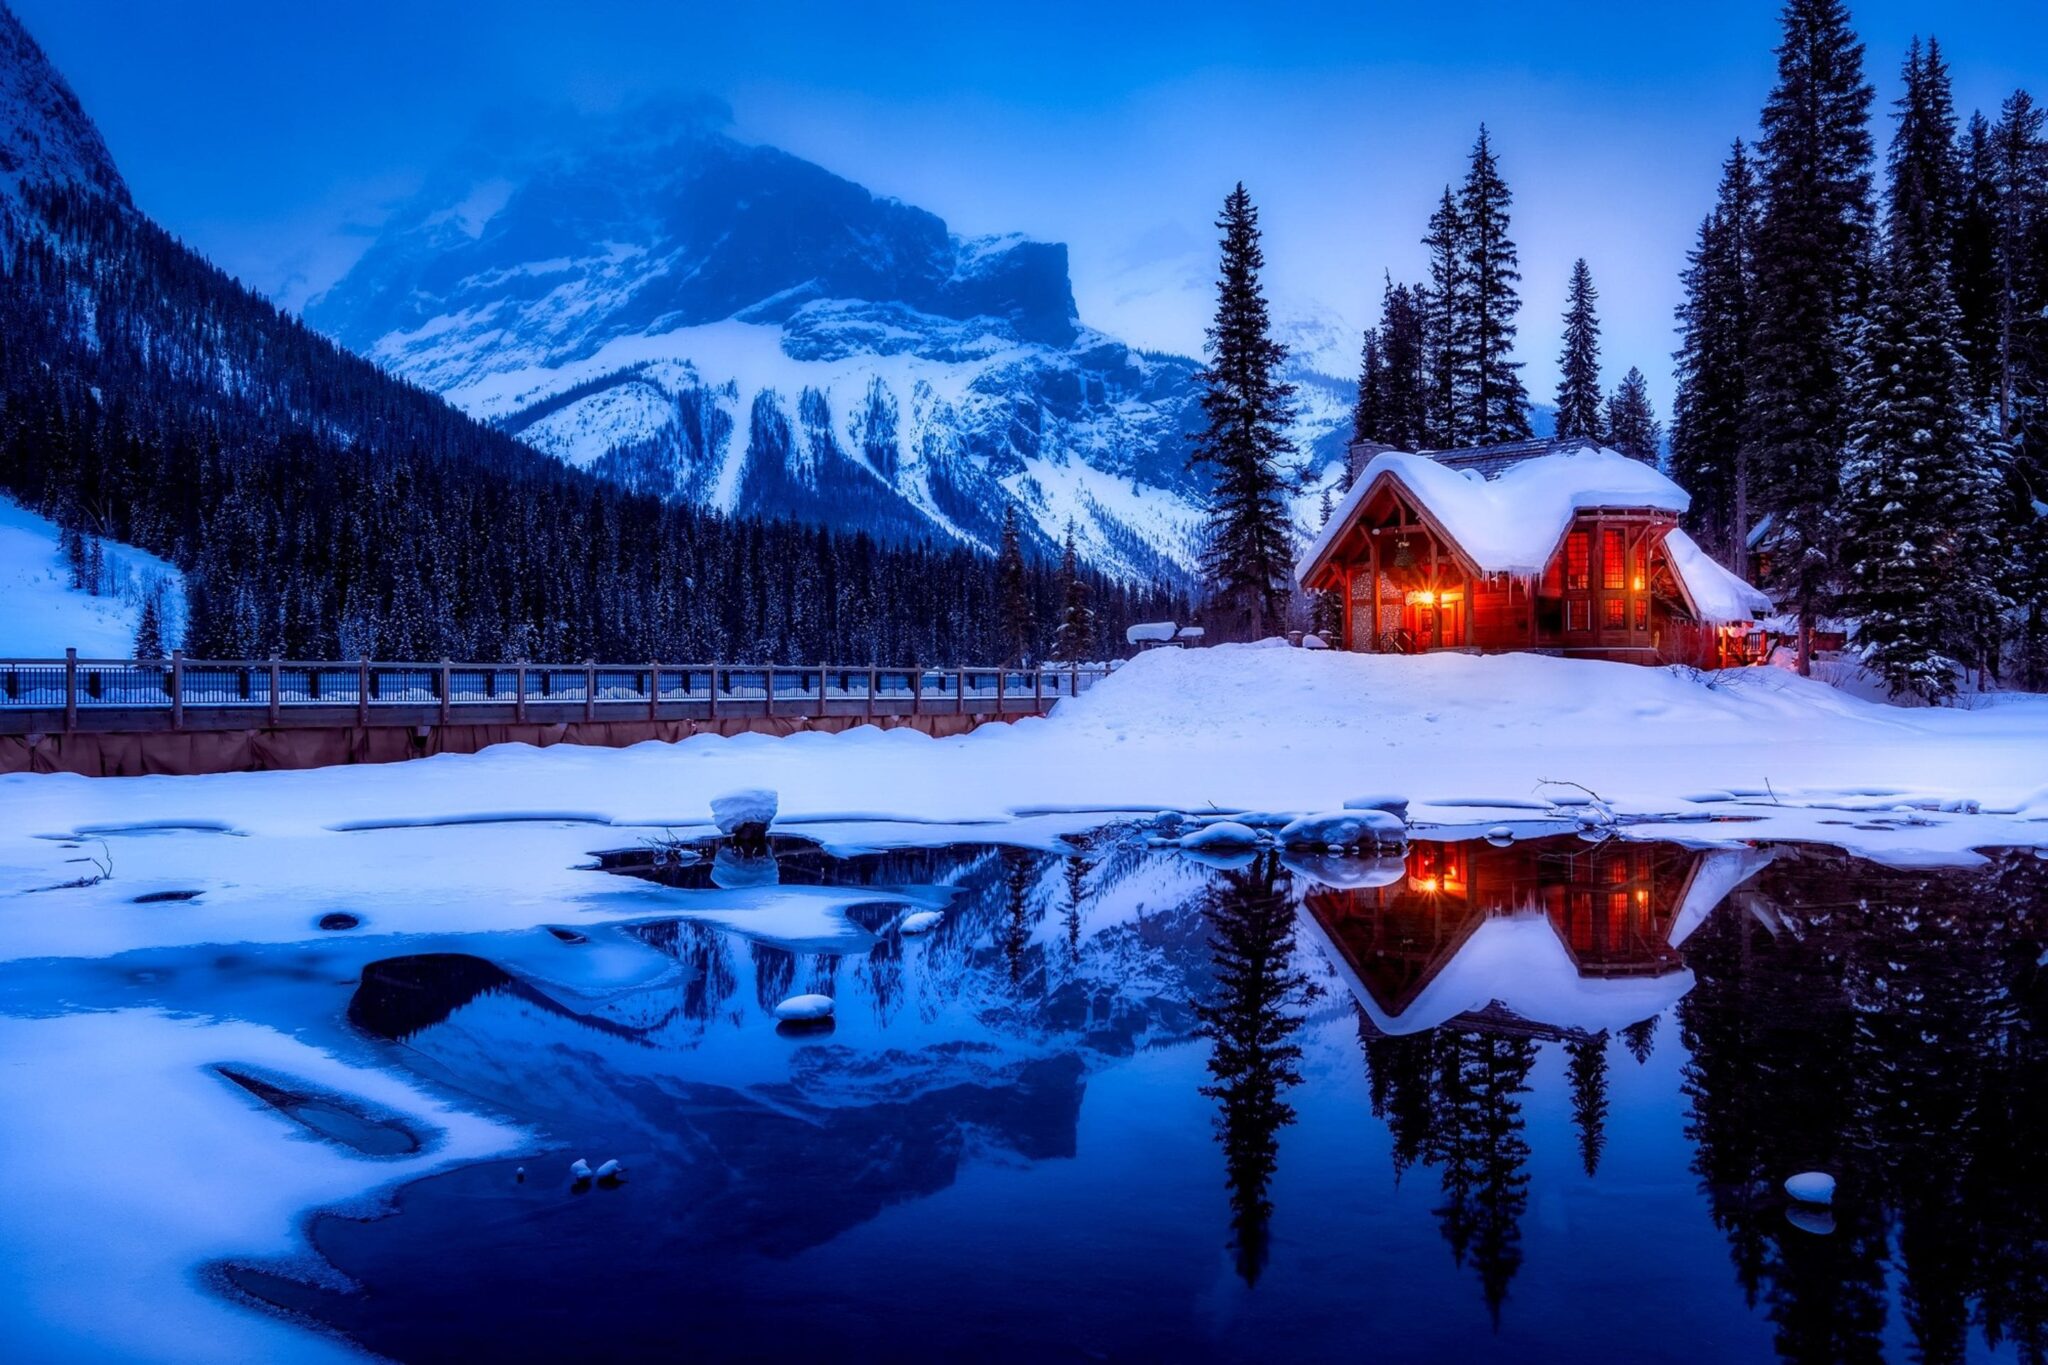 snowy lakeside cabin below the mountains illuminated from the inside at dusk